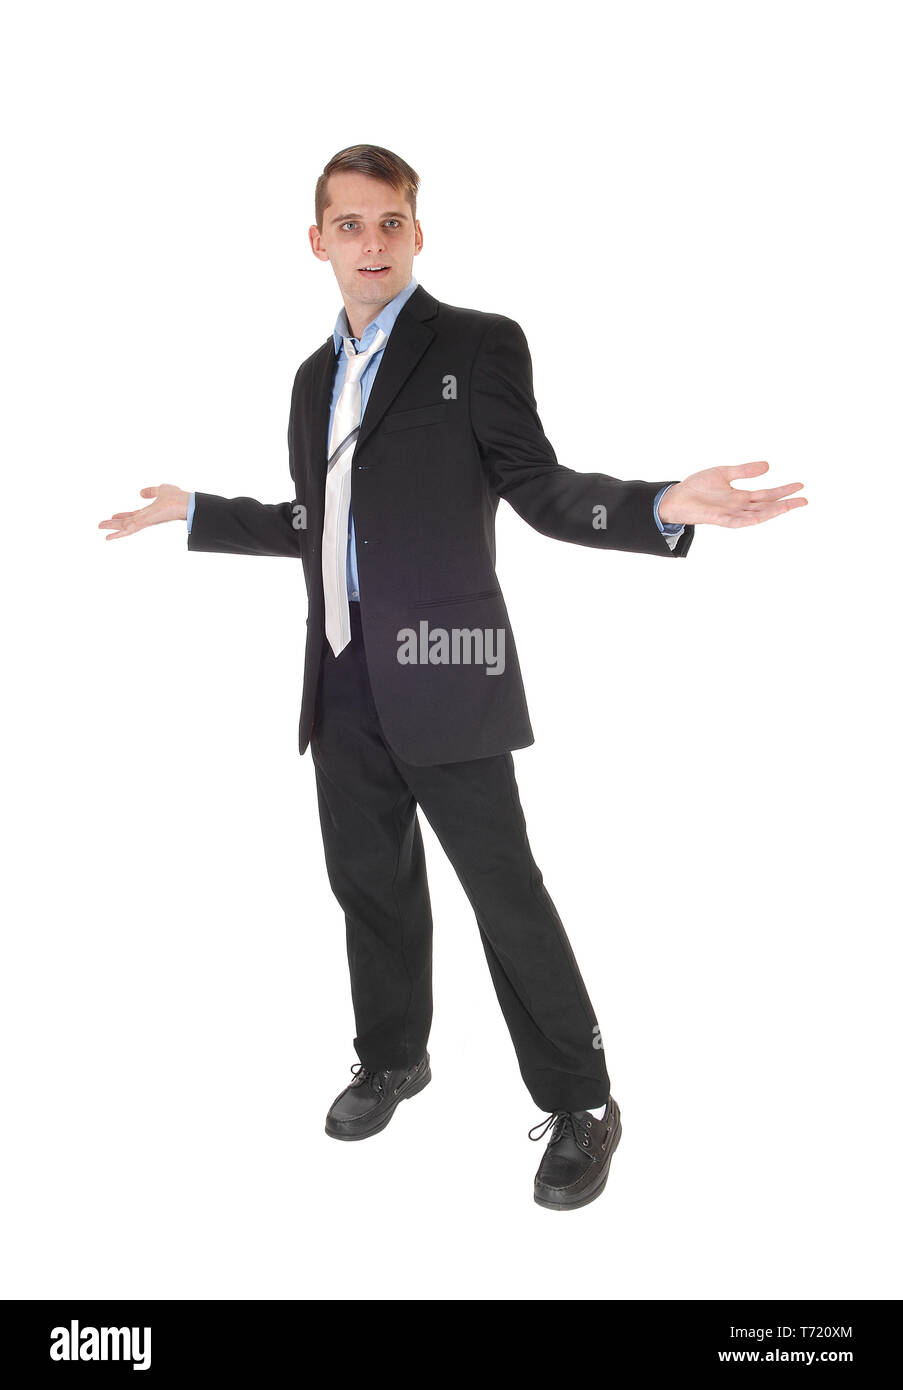 A man standing with hands outstretched is perplex Stock Photo